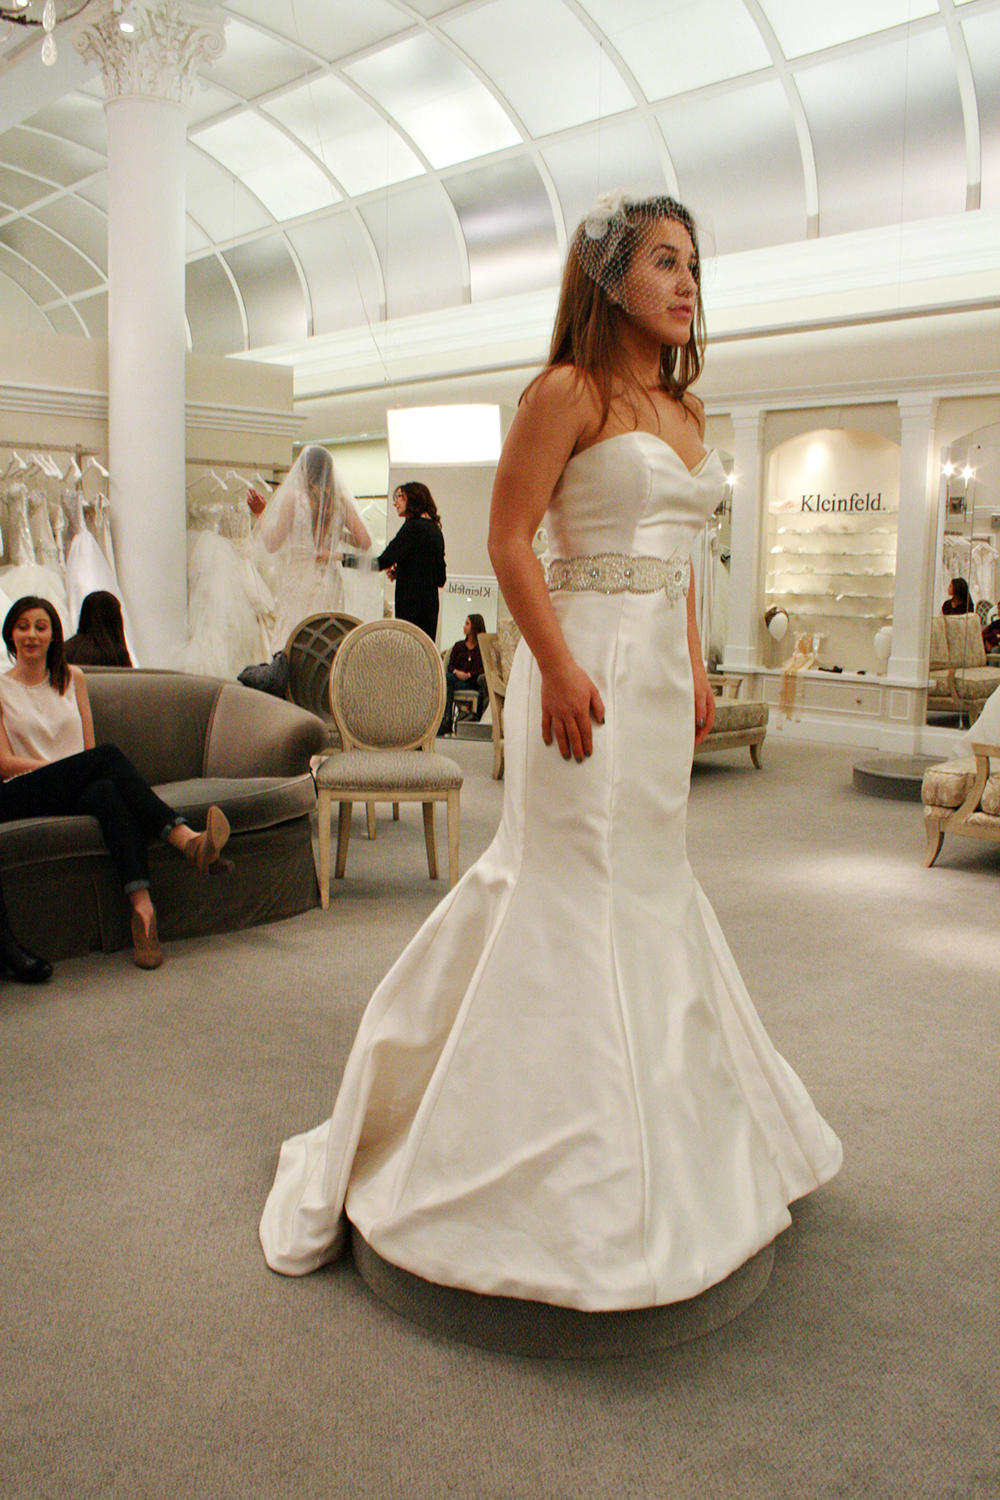 Season 11 Featured Wedding Dresses Part 13 Say Yes To The Dress Tlc 1228